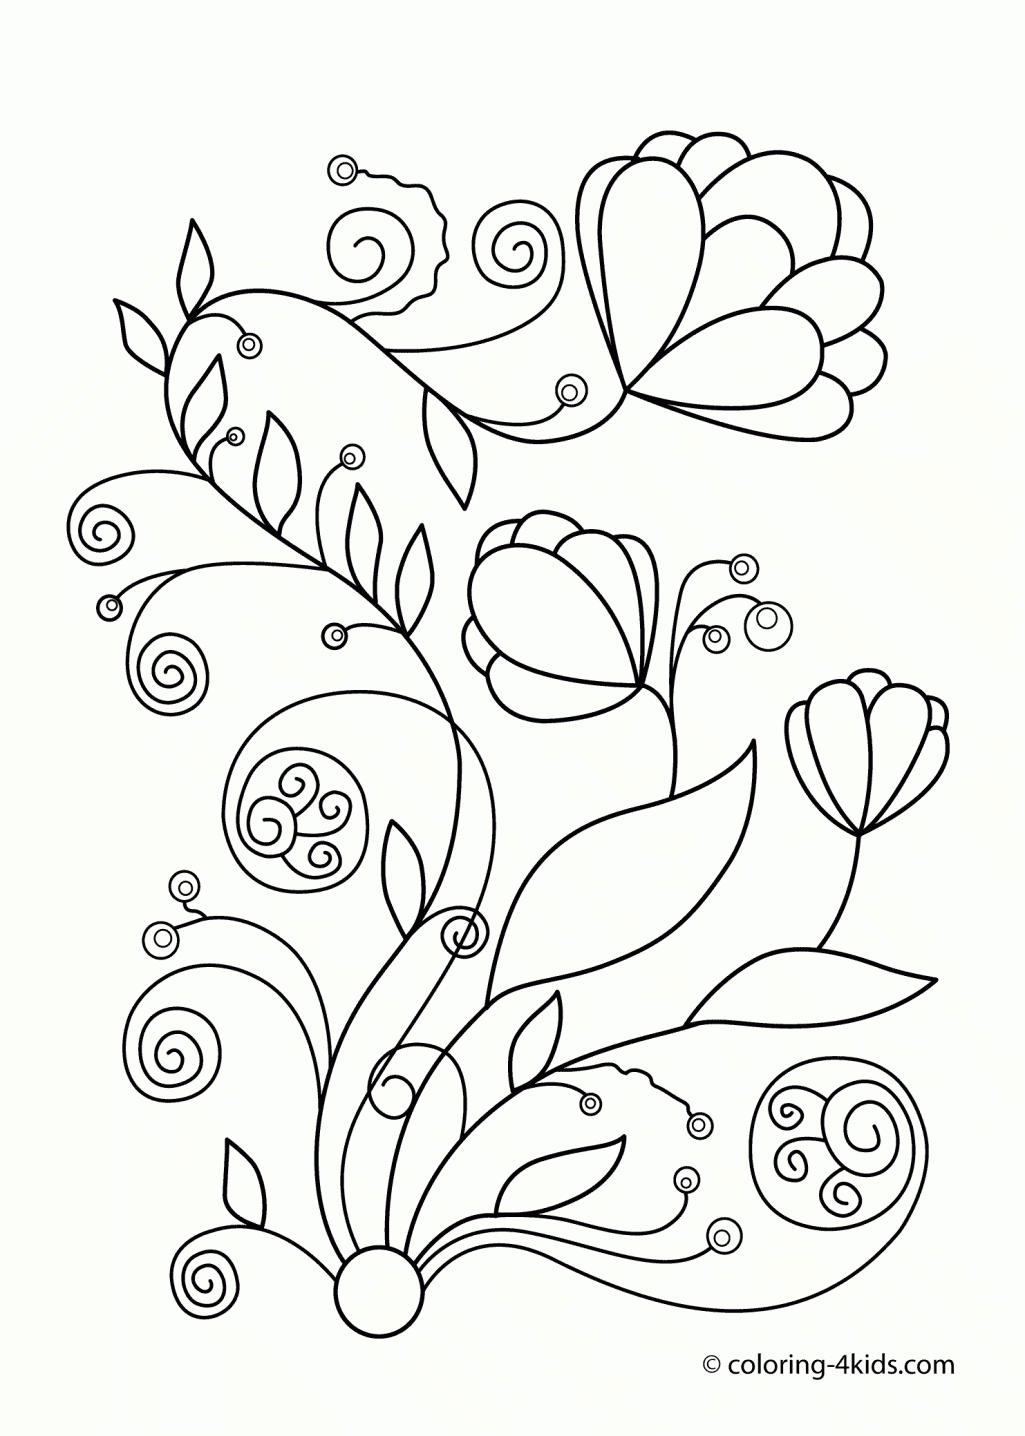 Spring Basket Coloring Page Free Printable Spring Flowers Coloring - Free Printable Spring Pictures To Color